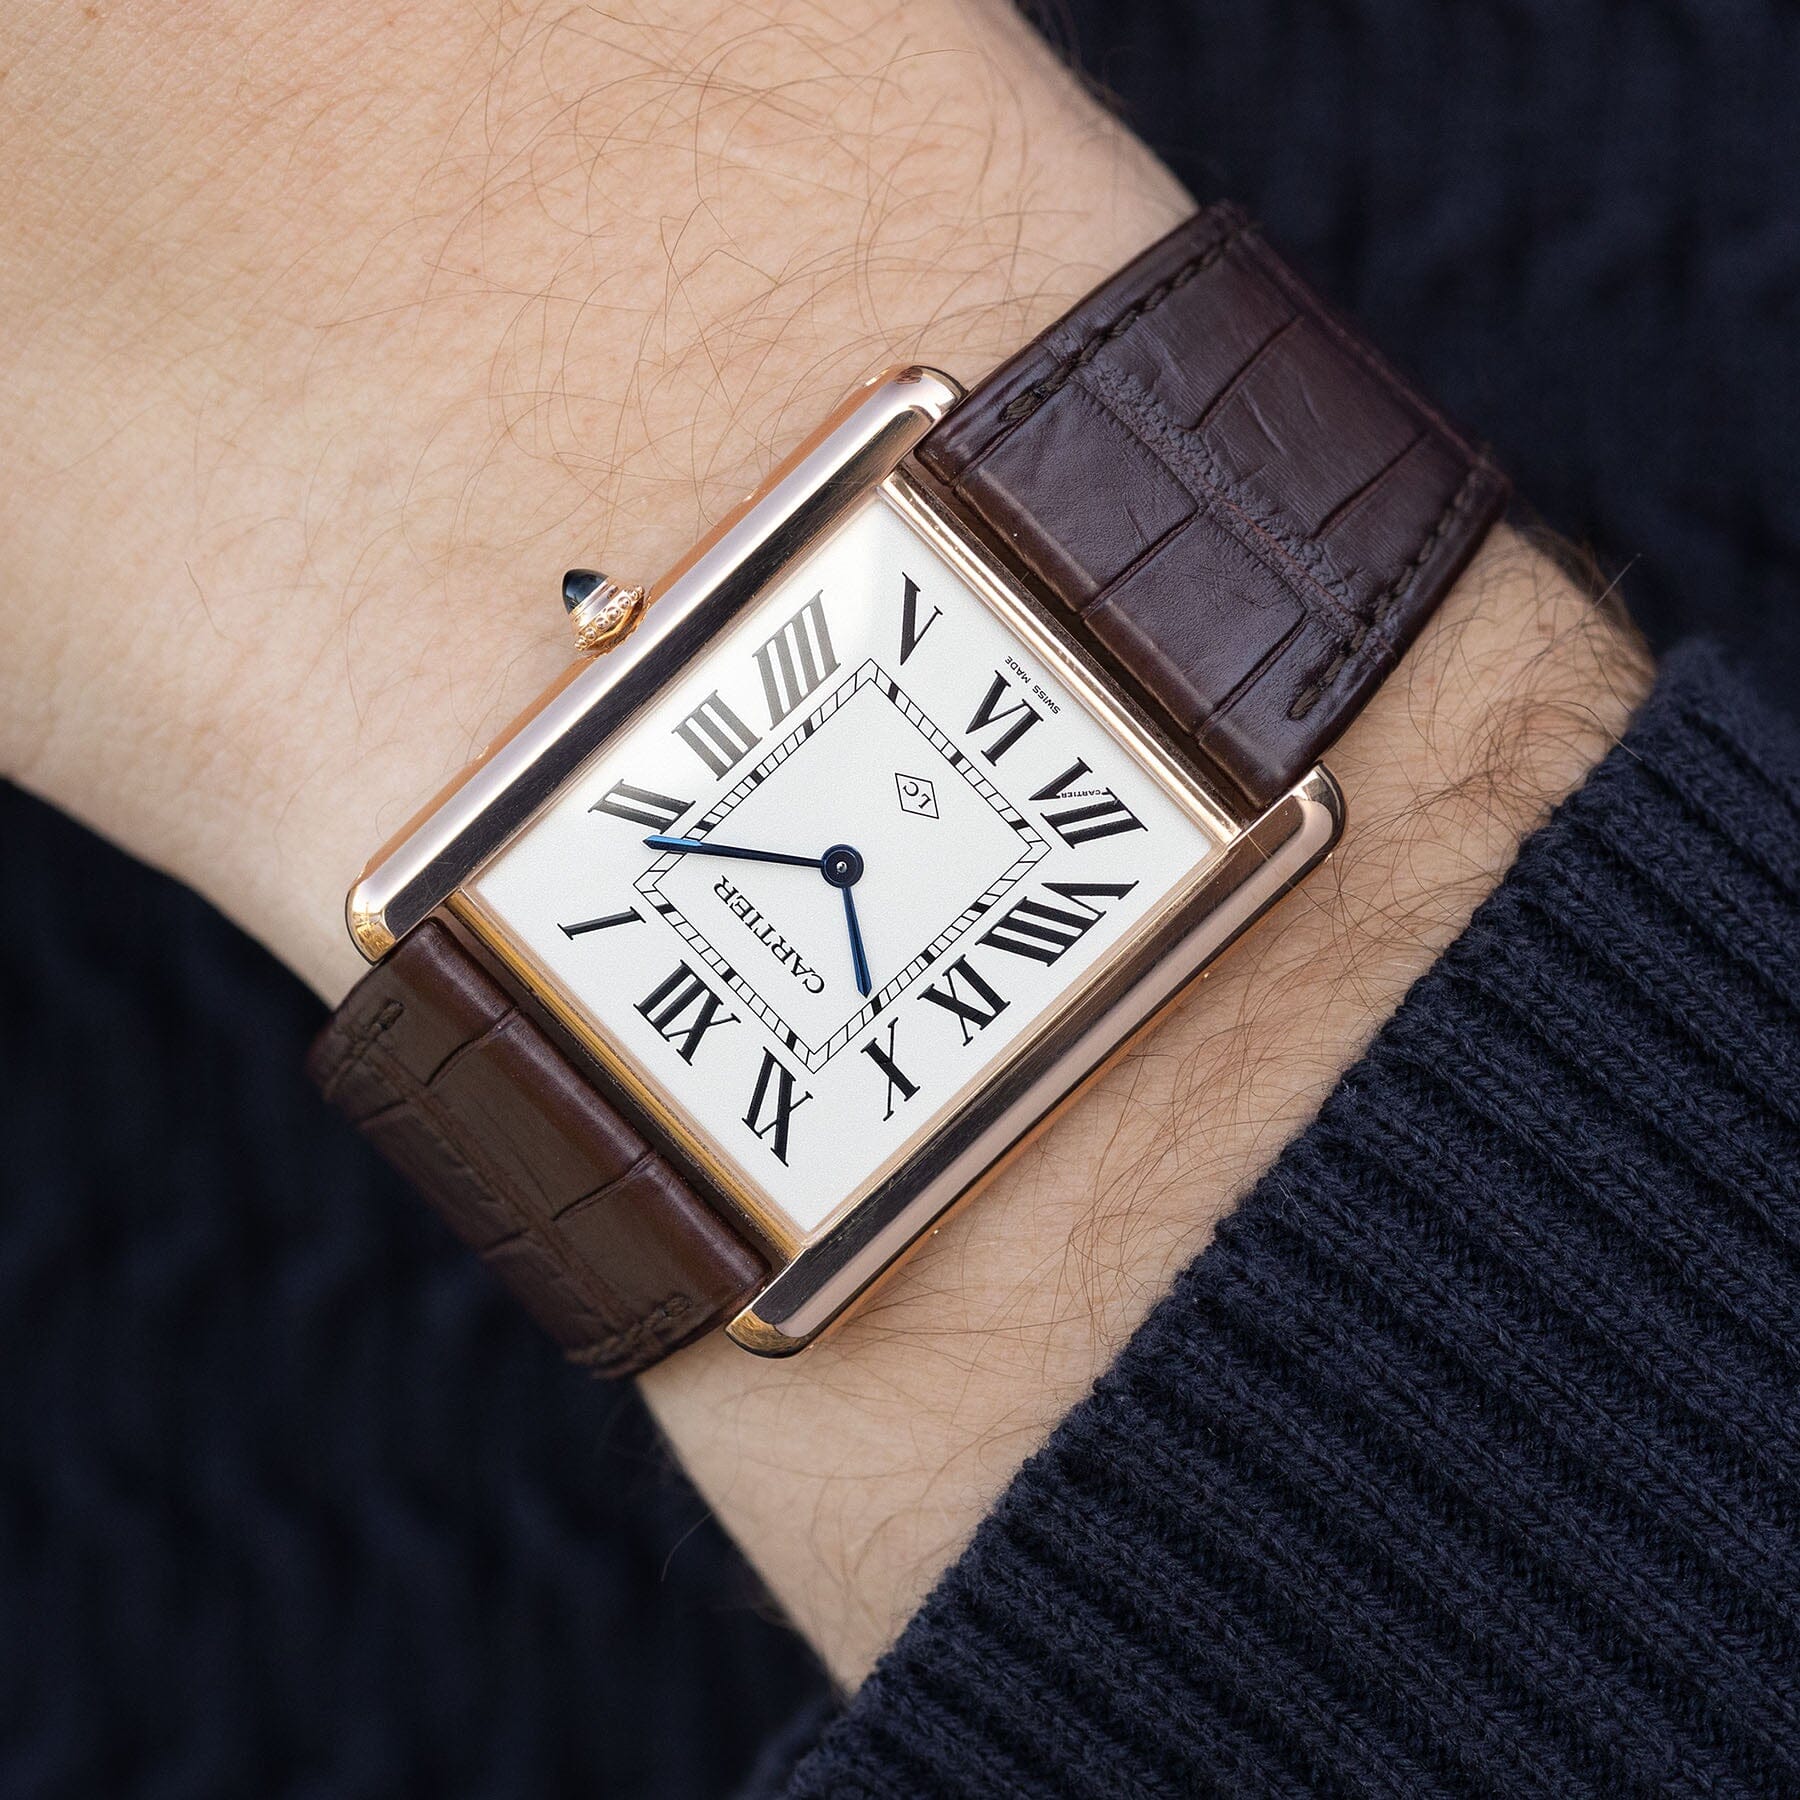 Is this Cartier Tank Louis Cartier too small?